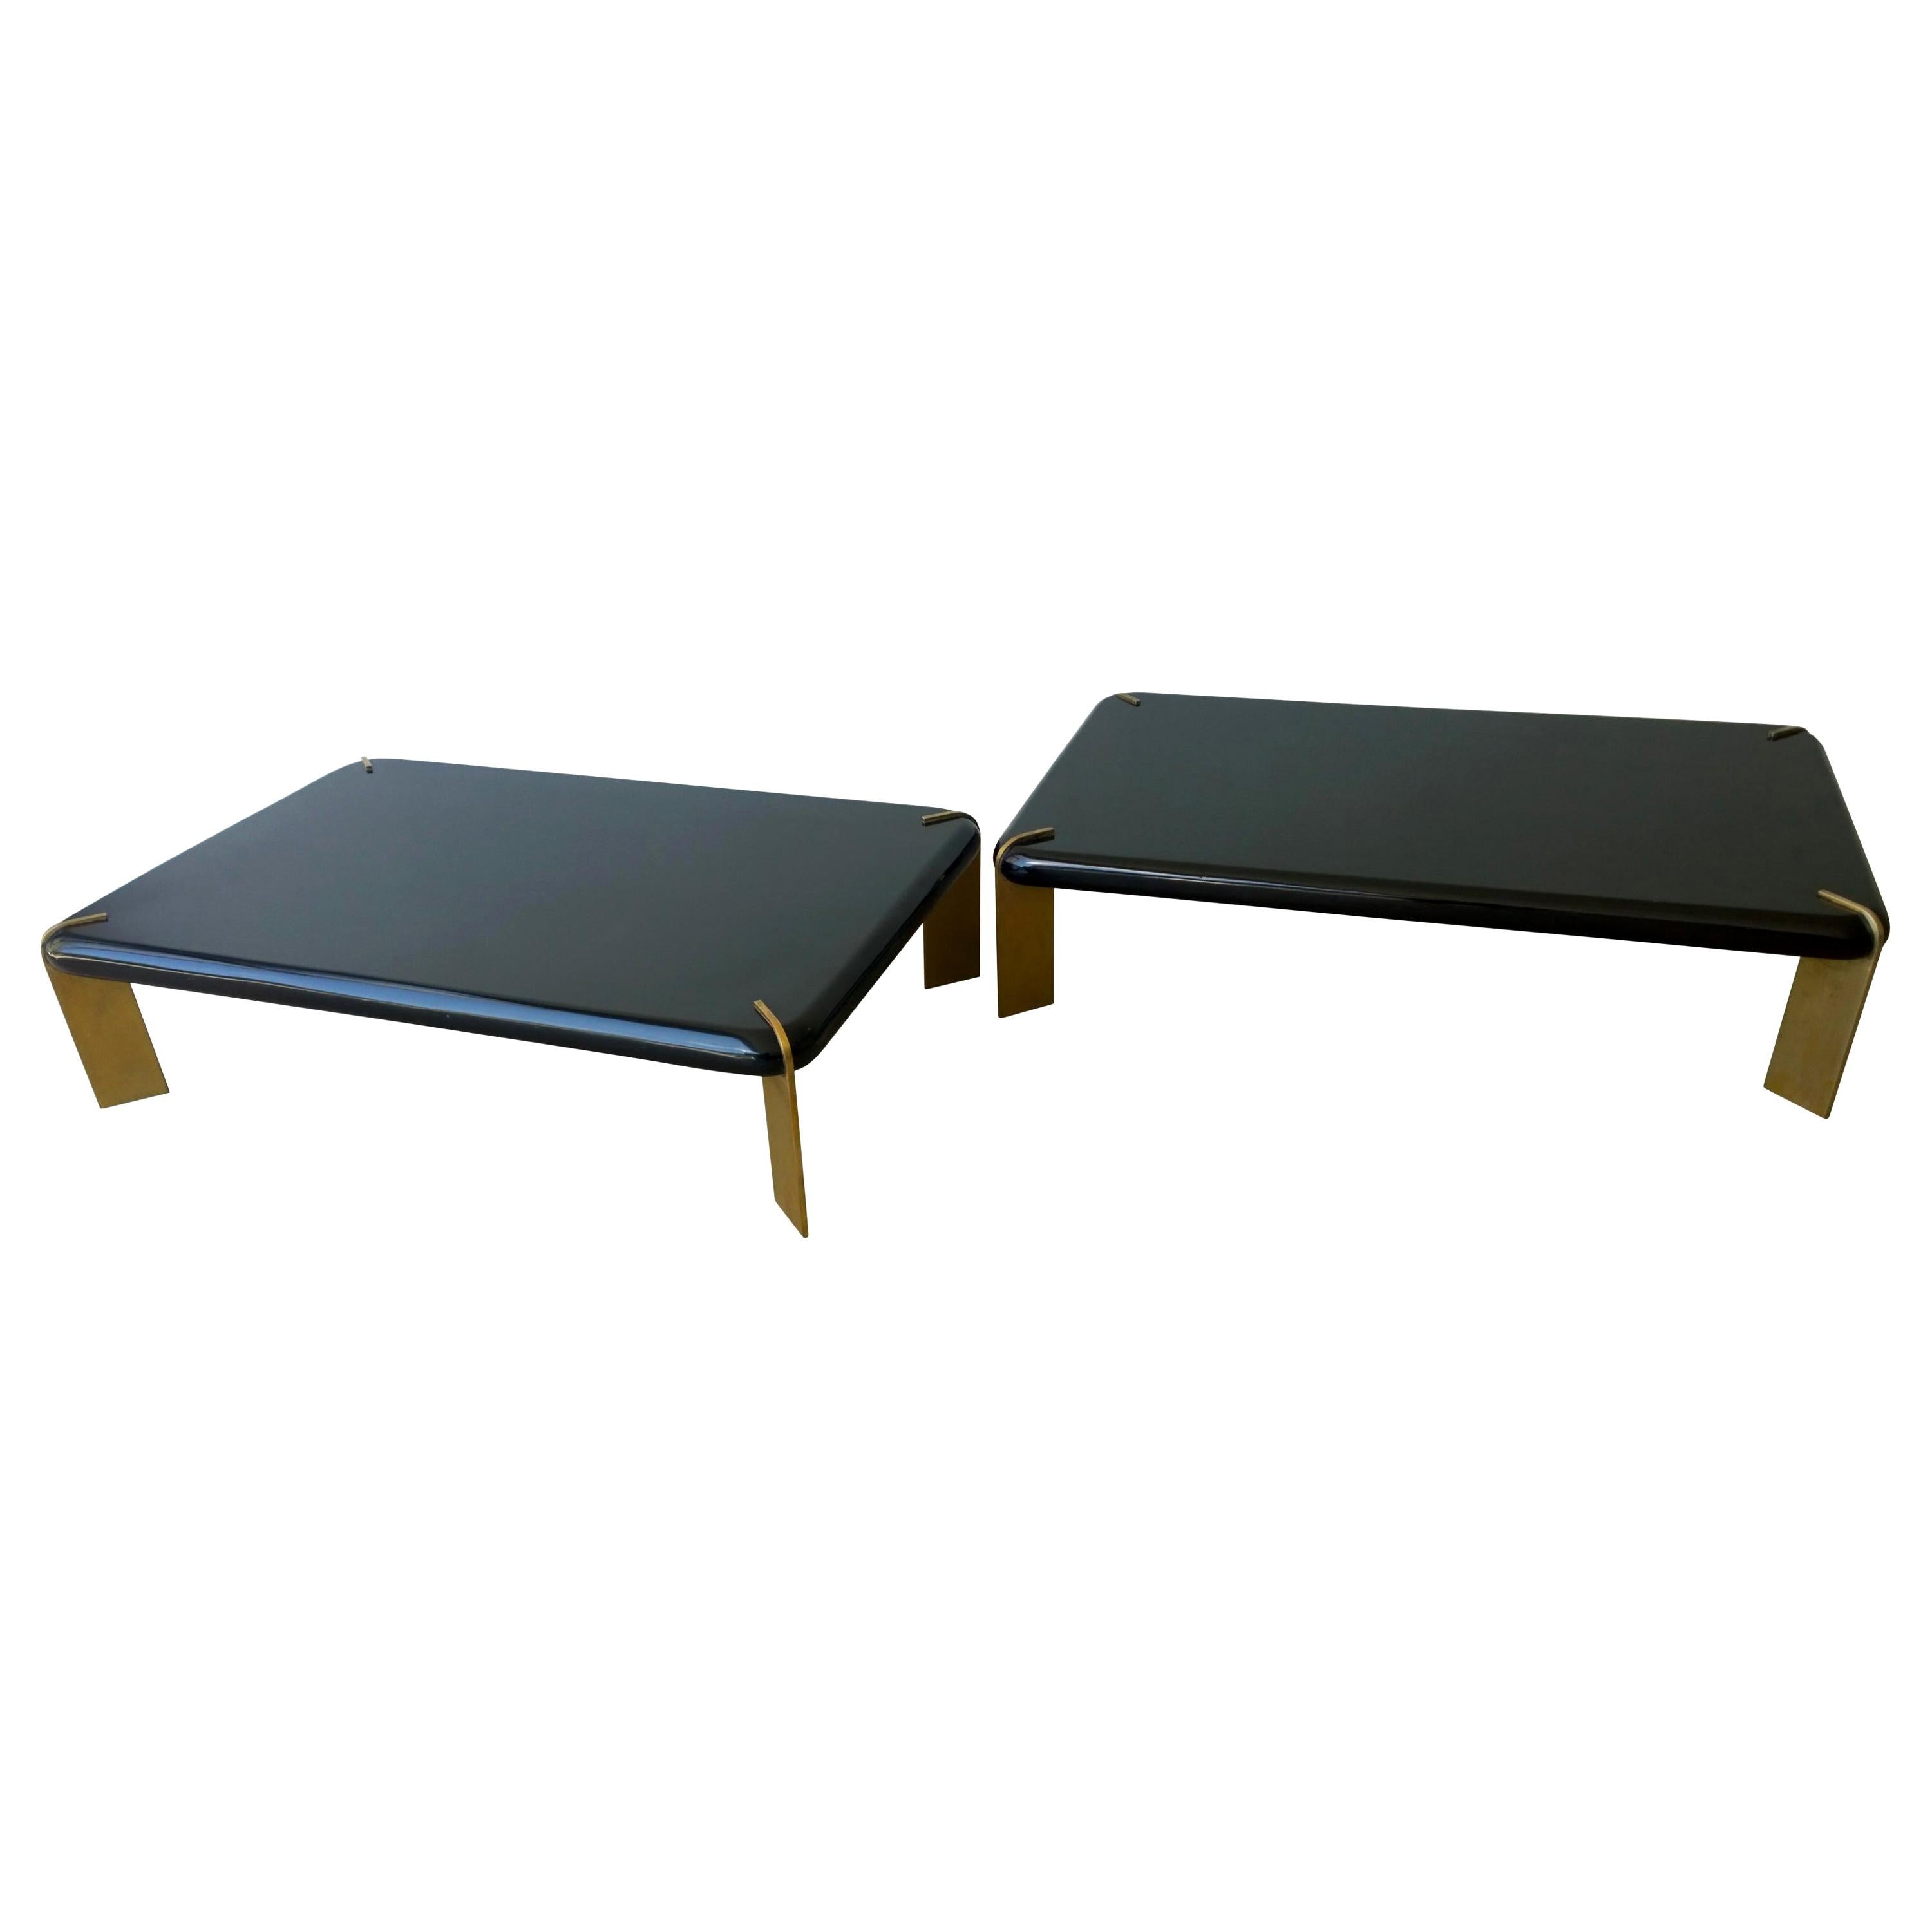 Two French Lacquered Black Wood and Four Bronze Legs Cocktail Coffee Tables For Sale